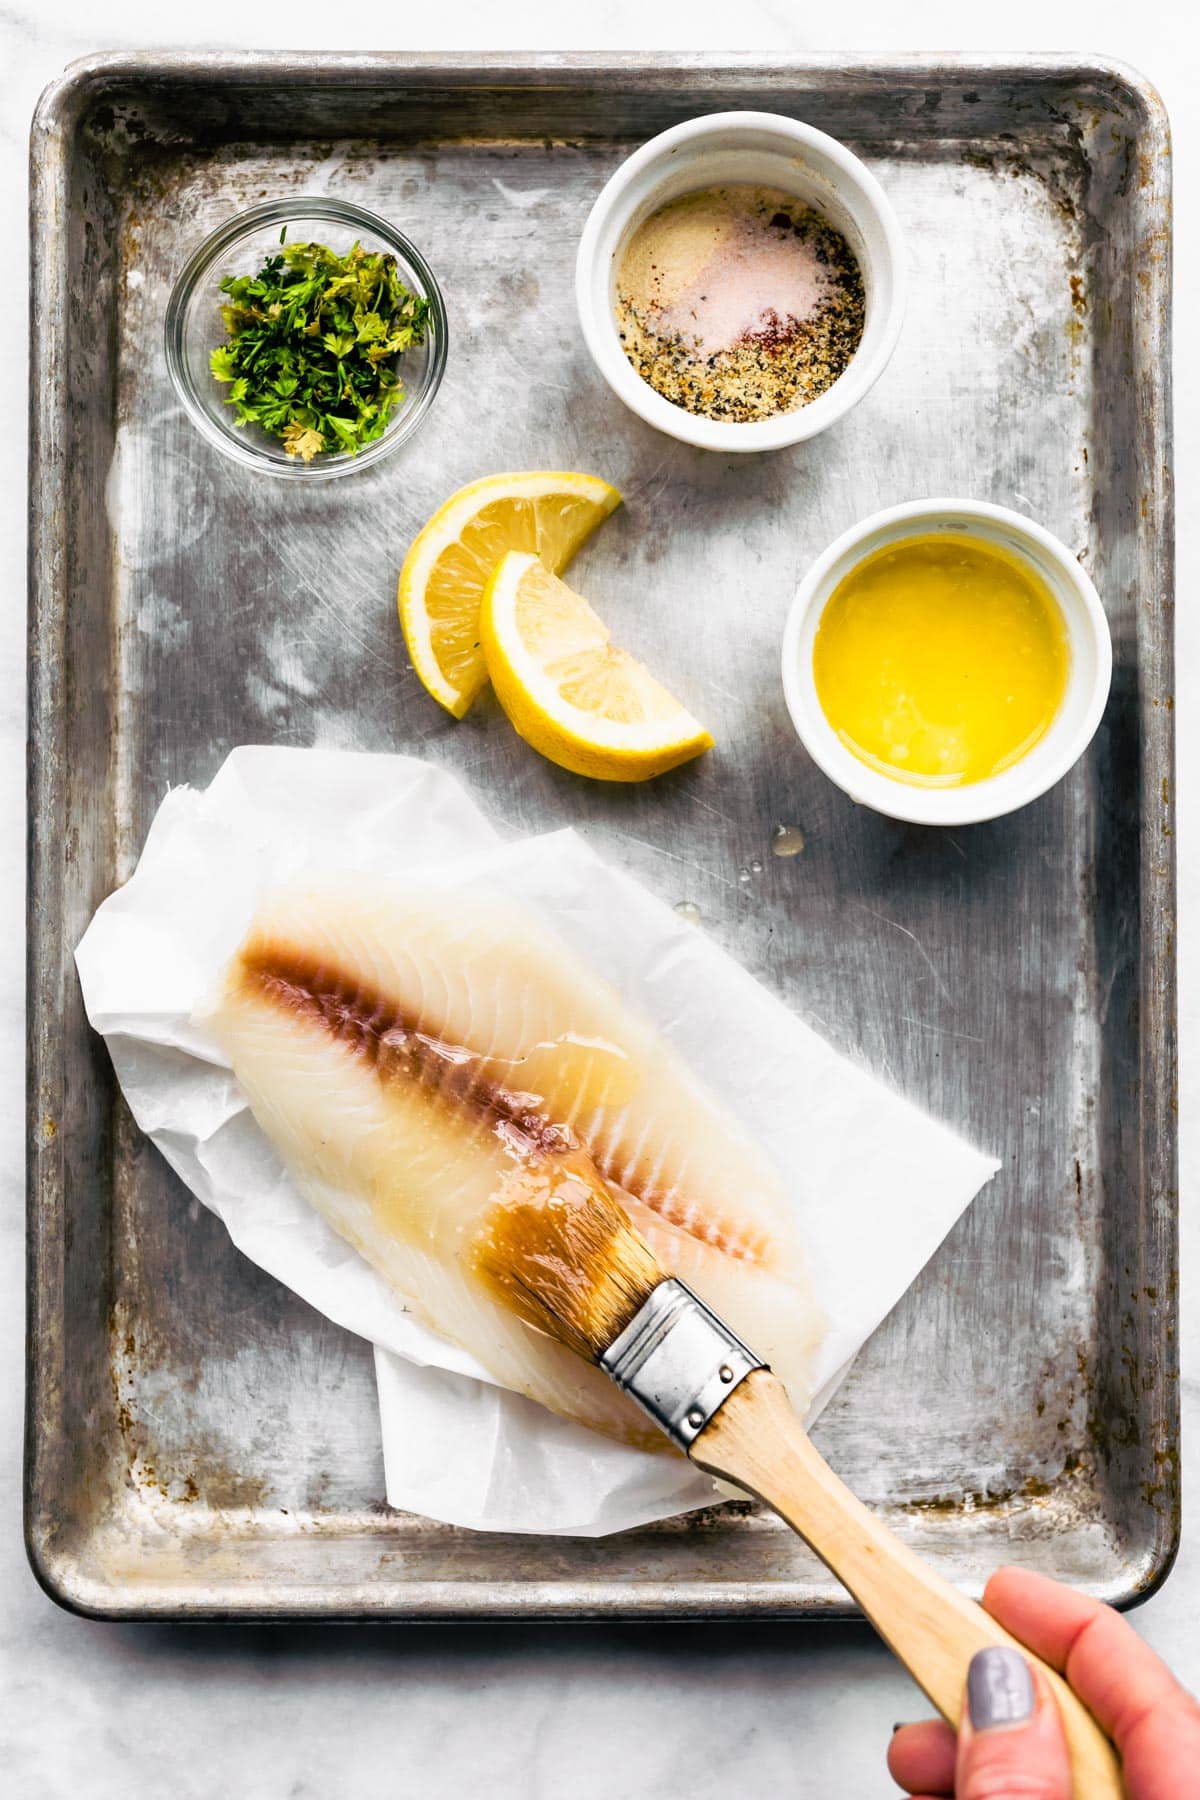 With ingredients on a baking sheet a hand is spreading melted butter onto the raw fish fillet.